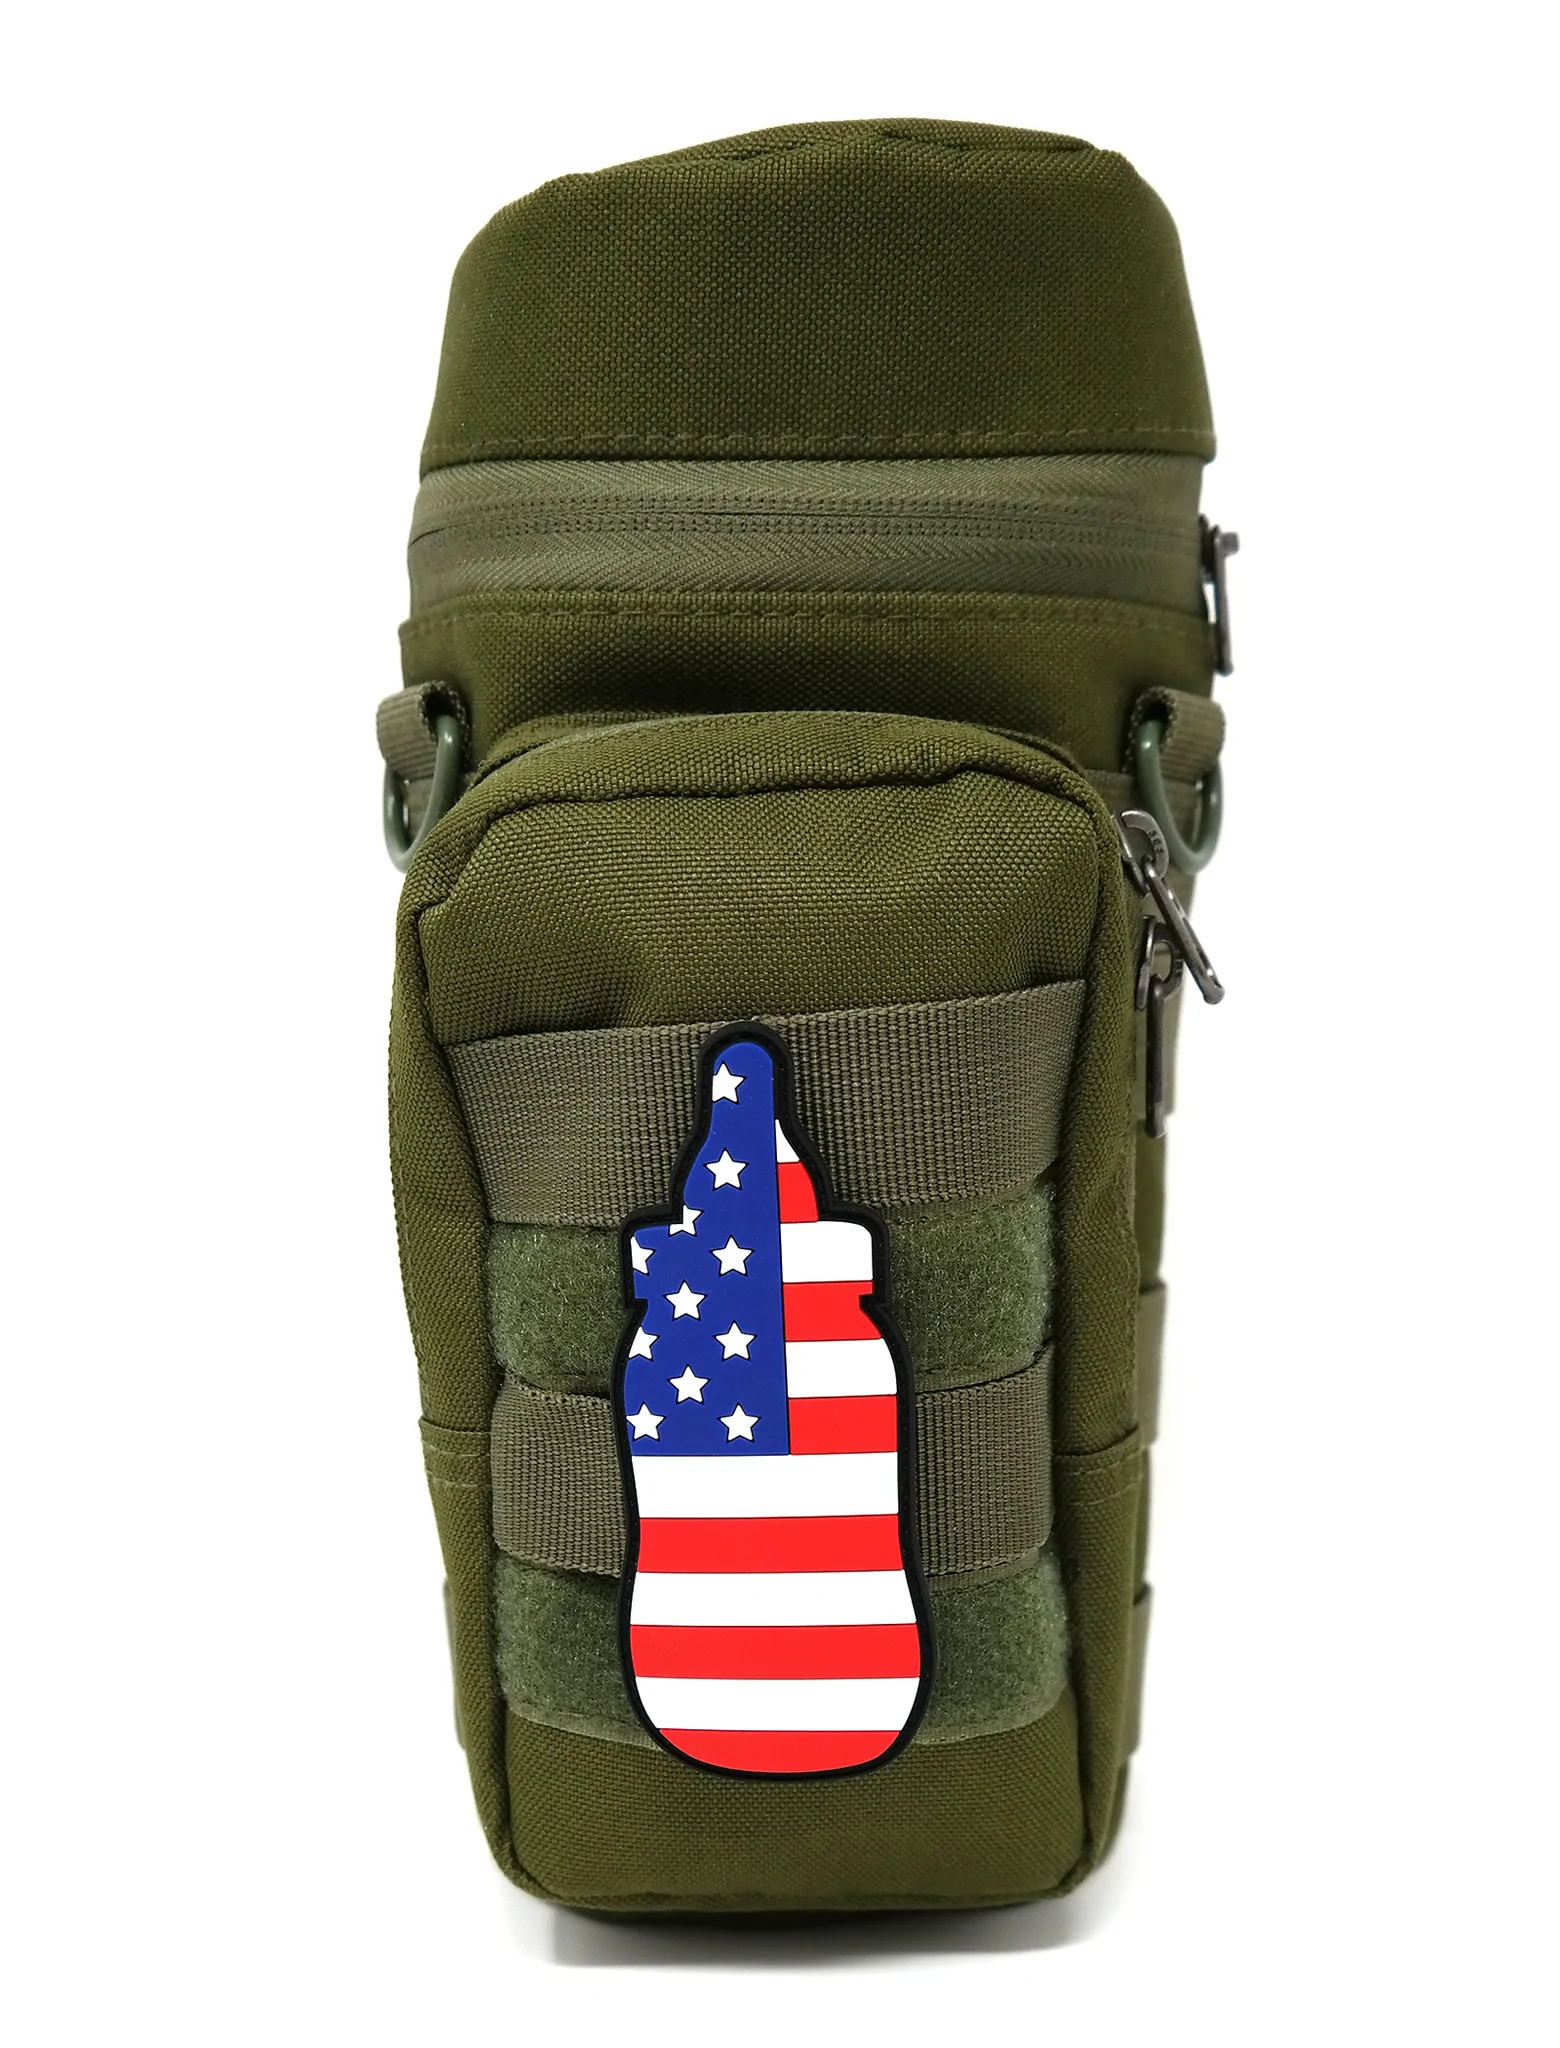 american-flag-baby-bottle-tactical-diaper-bag-patch-on-bag-2_1024x1024@2x.webp